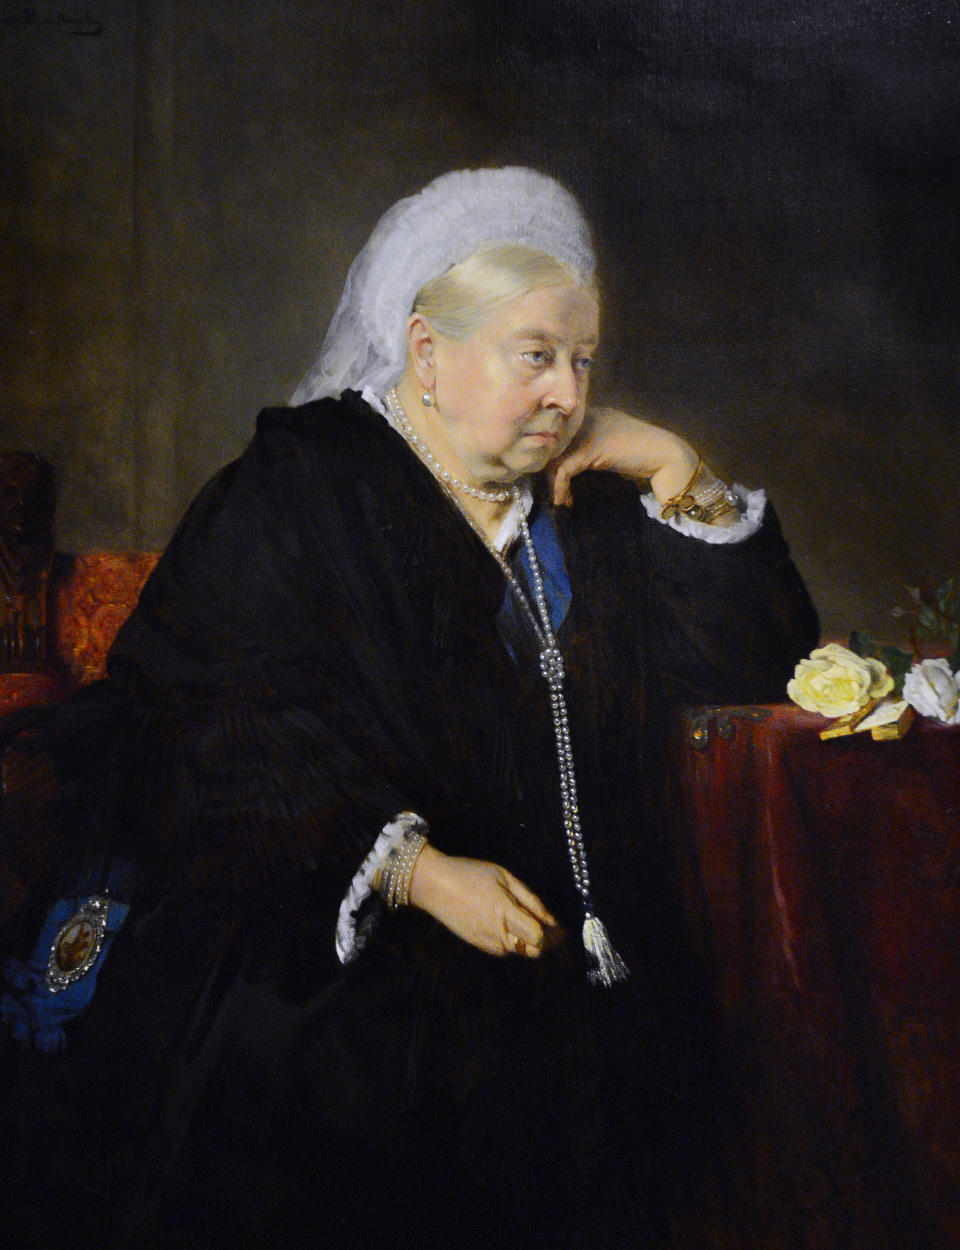 A portrait of England's Queen Victoria (1819-1901), painted in 1900 by Bertha Muller, is on display at the National Portrait Gallery in London, England.  The painting shows the Queen approaching the end of her long reign and she wears the blue sash of the Order of the Garter.  (Photo by Robert Alexander/Getty Images)